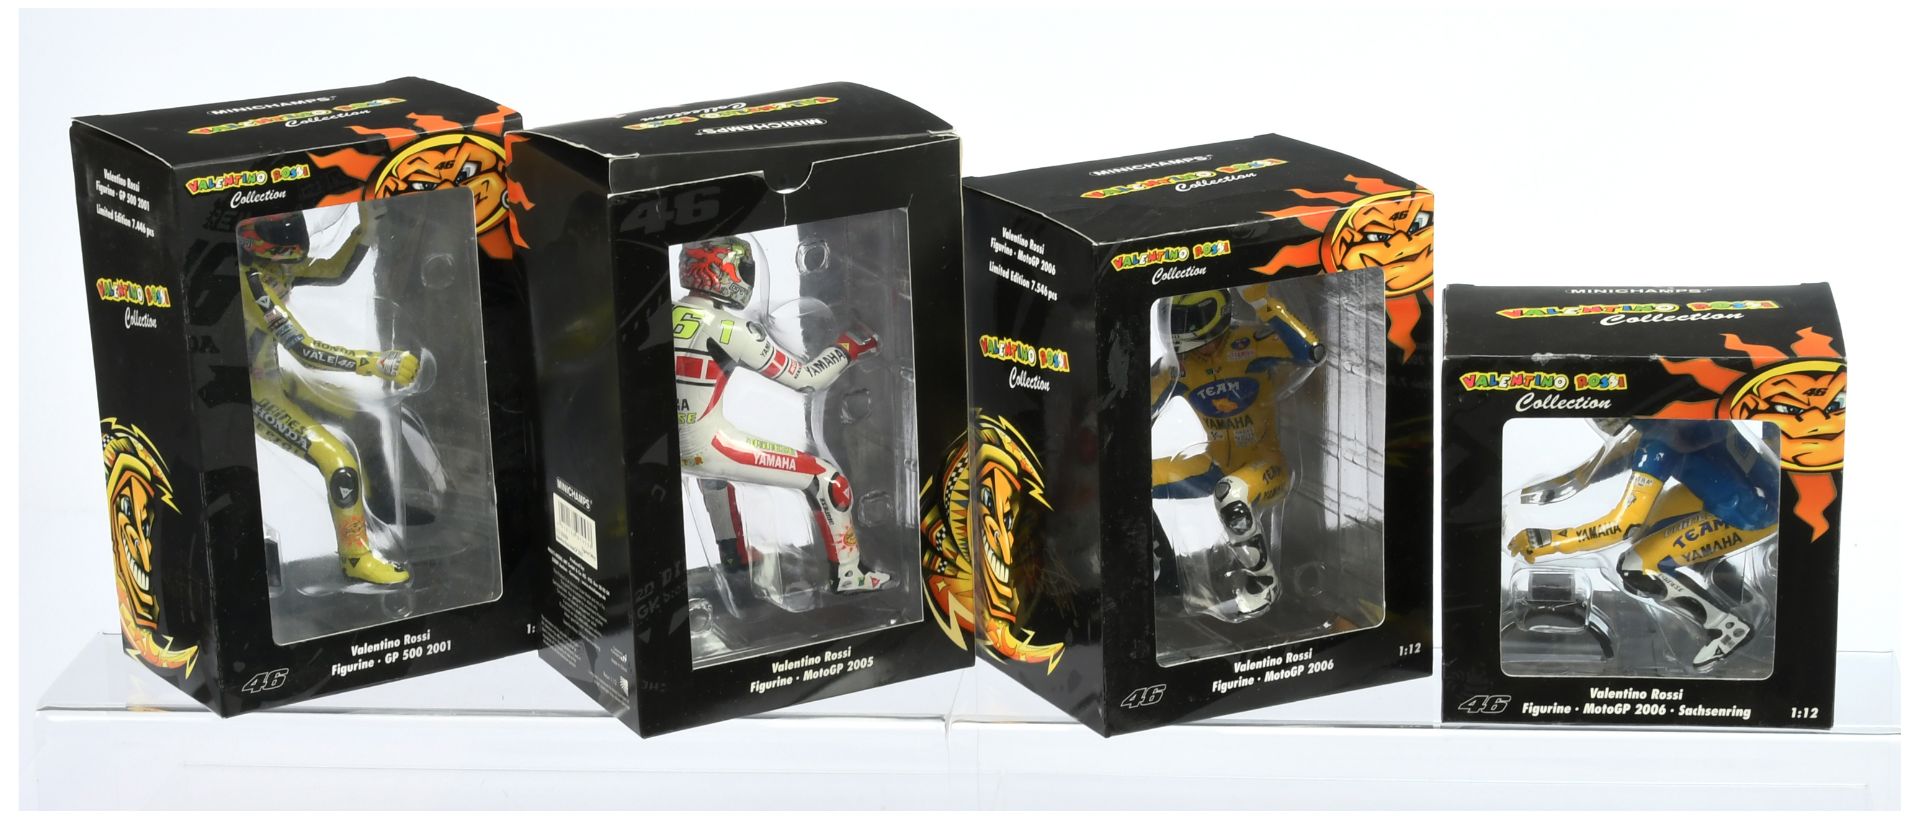 Minichamps (1/12th) - "Valentino Rossi" Figures Group Of 4 - (1) 312 060196 GP 2006, (2) 312 0601...